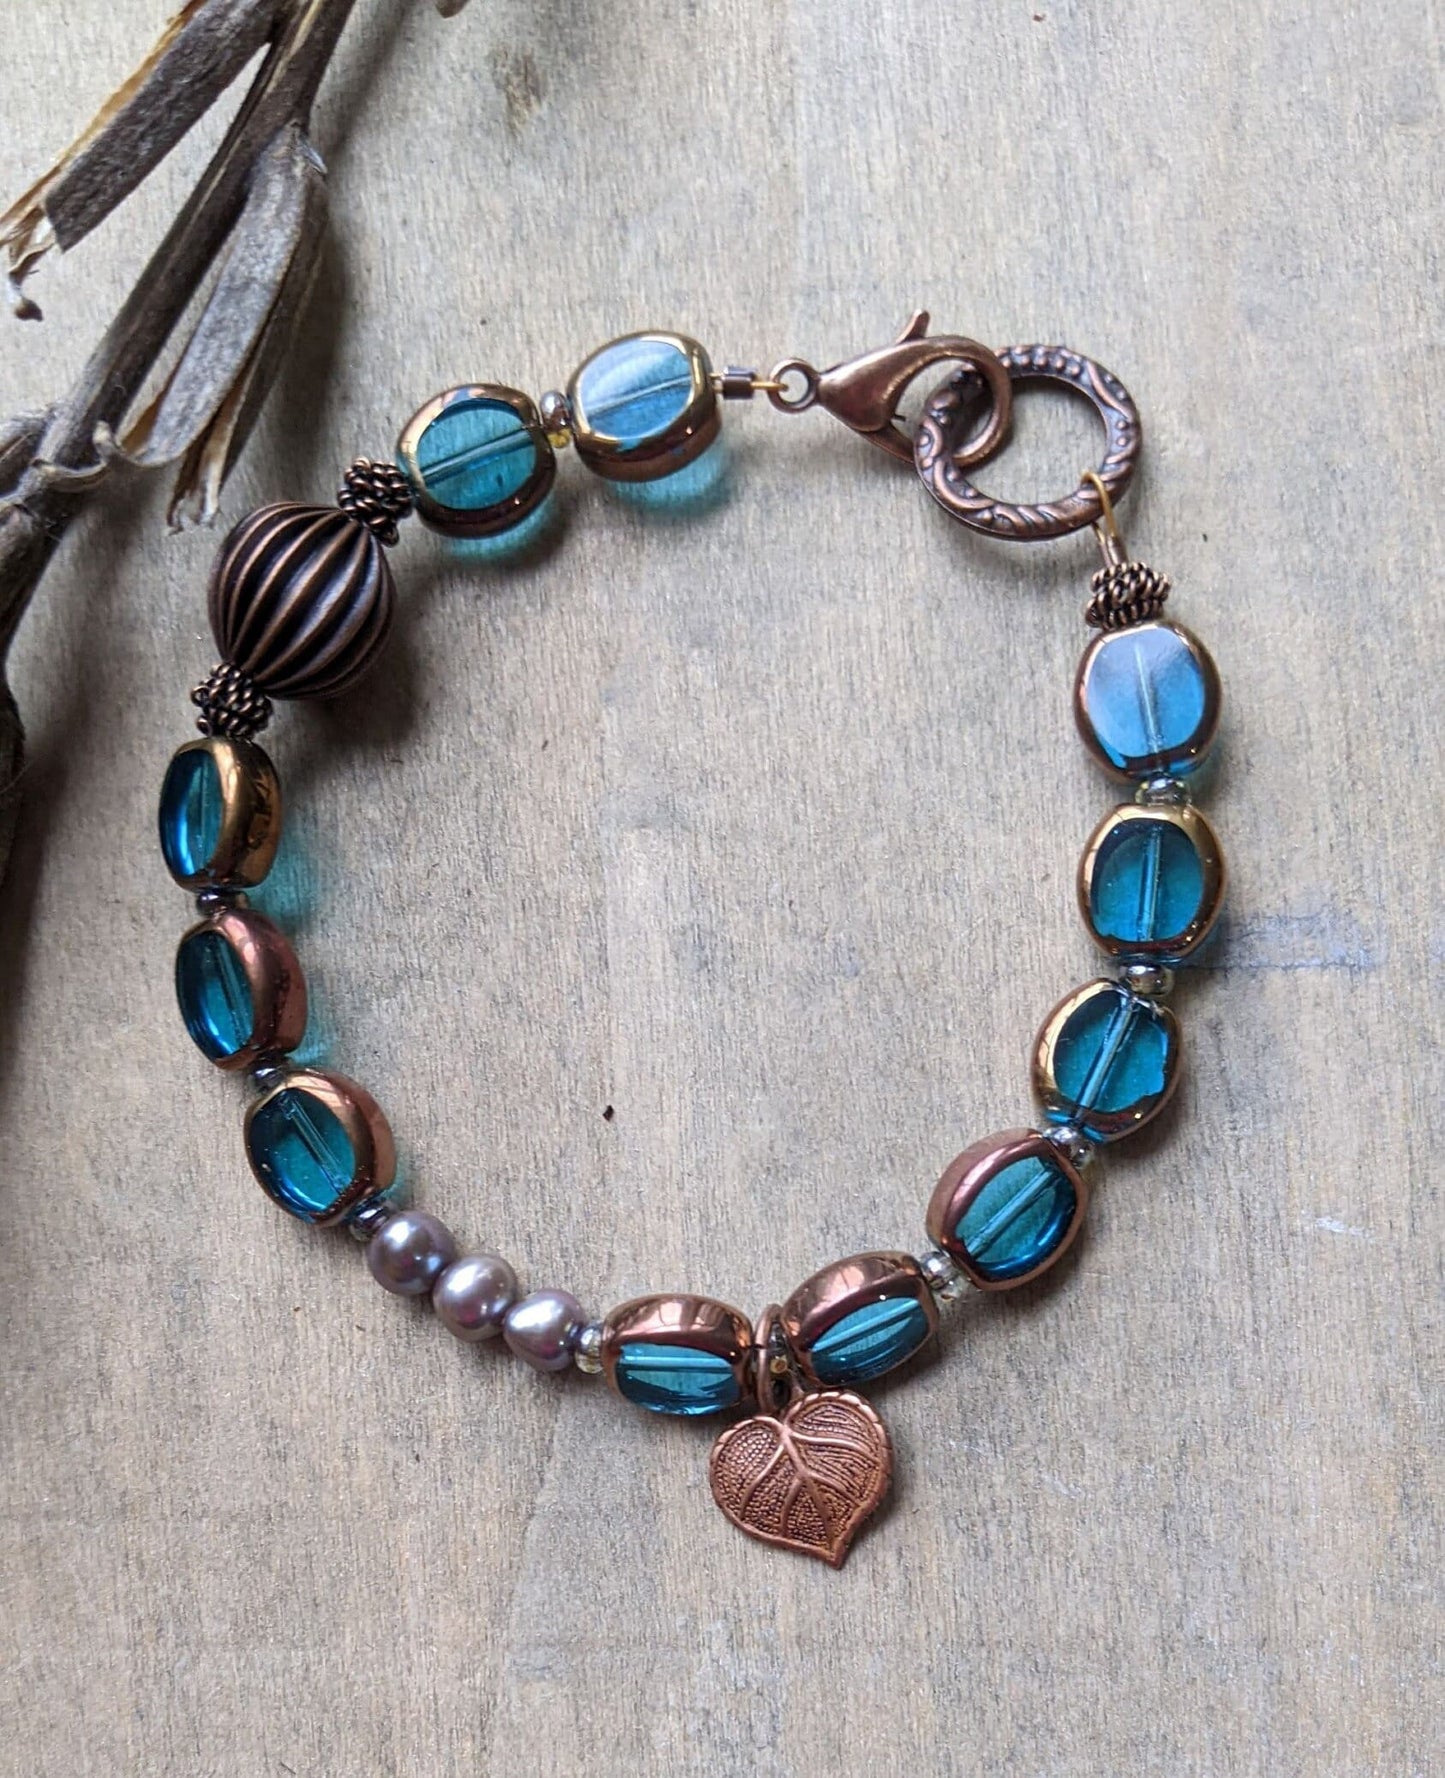 Beaded Bracelet Blue Glass and Copper